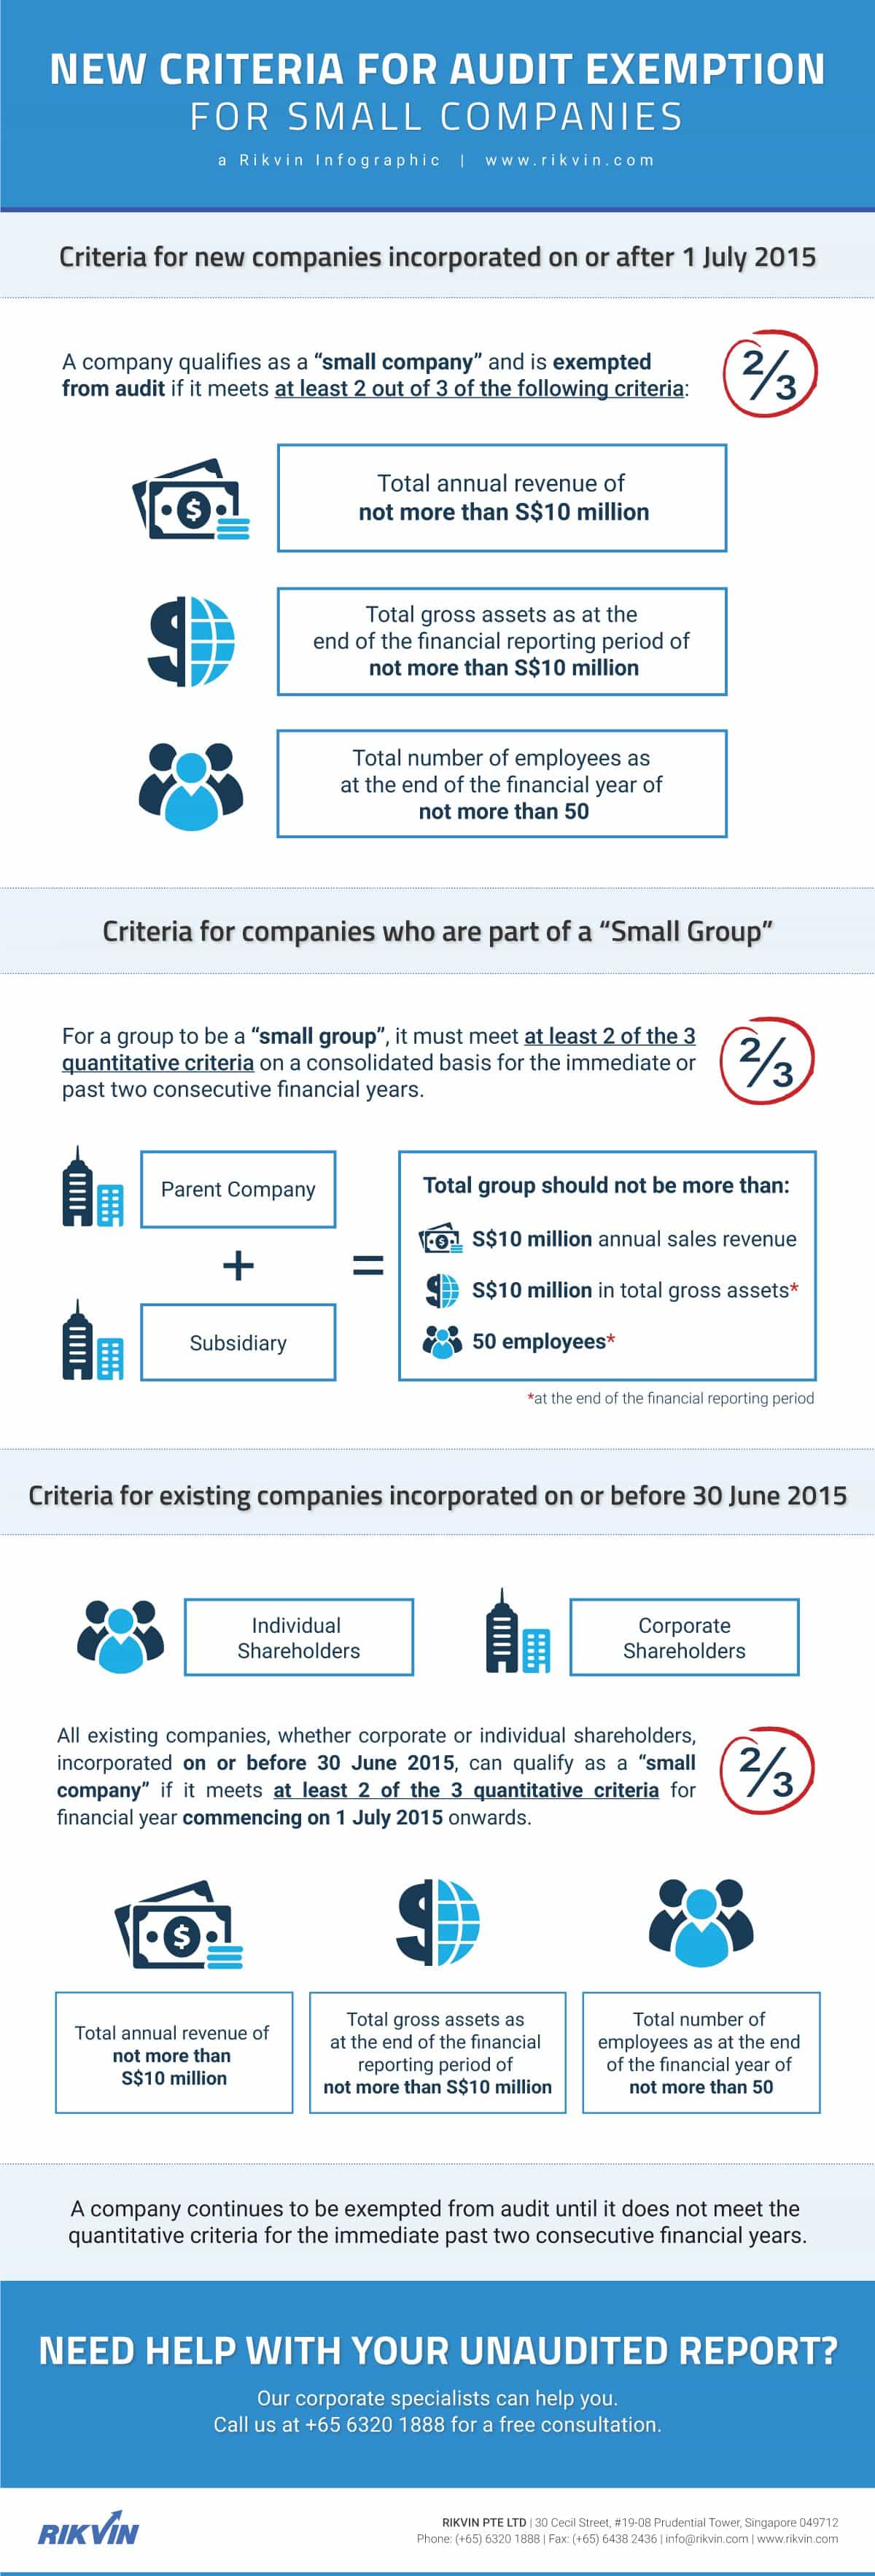 new criteria for audit exemption for small companies rikvin infographic